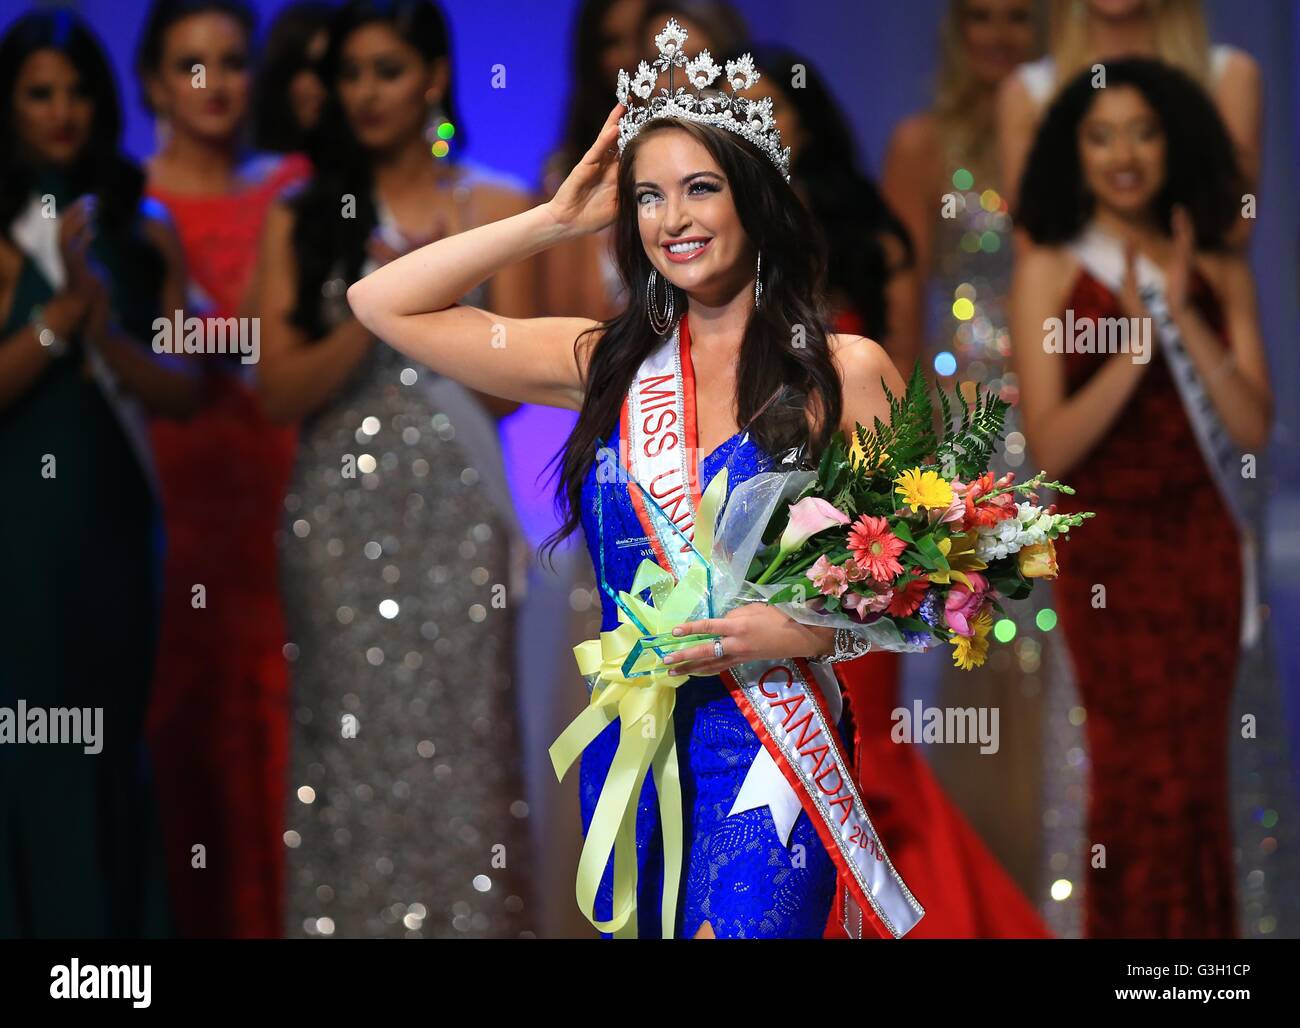 Toronto, Canada. 11th June, 2016. Winner Siera Bearchell celebrates on  stage during the 2016 Miss Universe Canada Pageant Final in Toronto,  Canada, June 11, 2016. 20-year-old contestant Siera Bearchell from the  Universtiy